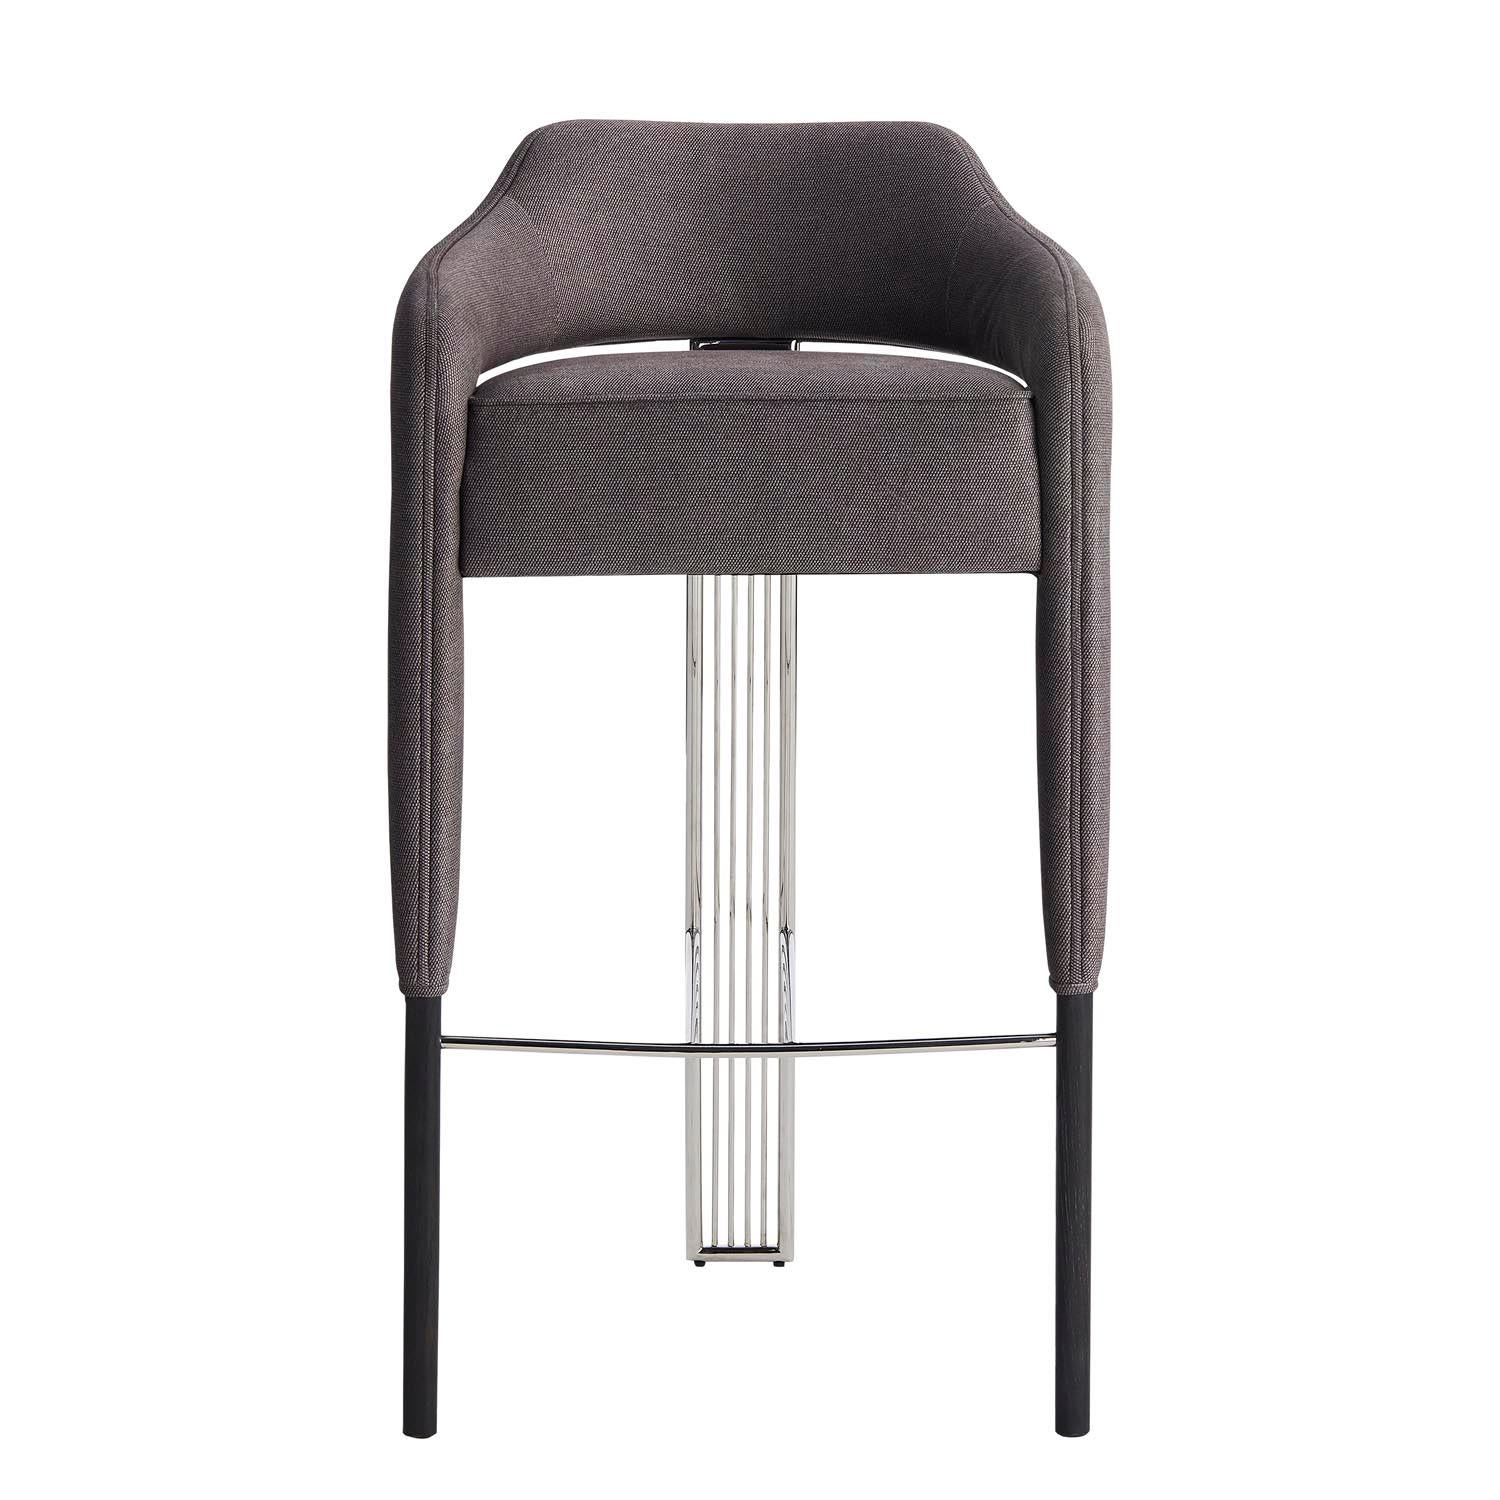 INVICTA II is a bar stool with a modern design, whose imposing character comes from the particular stainless steel rear leg, which contrasts with the delicacy of the detail of the piping that runs from the backrest along the legs.‎‎ Invicta II is